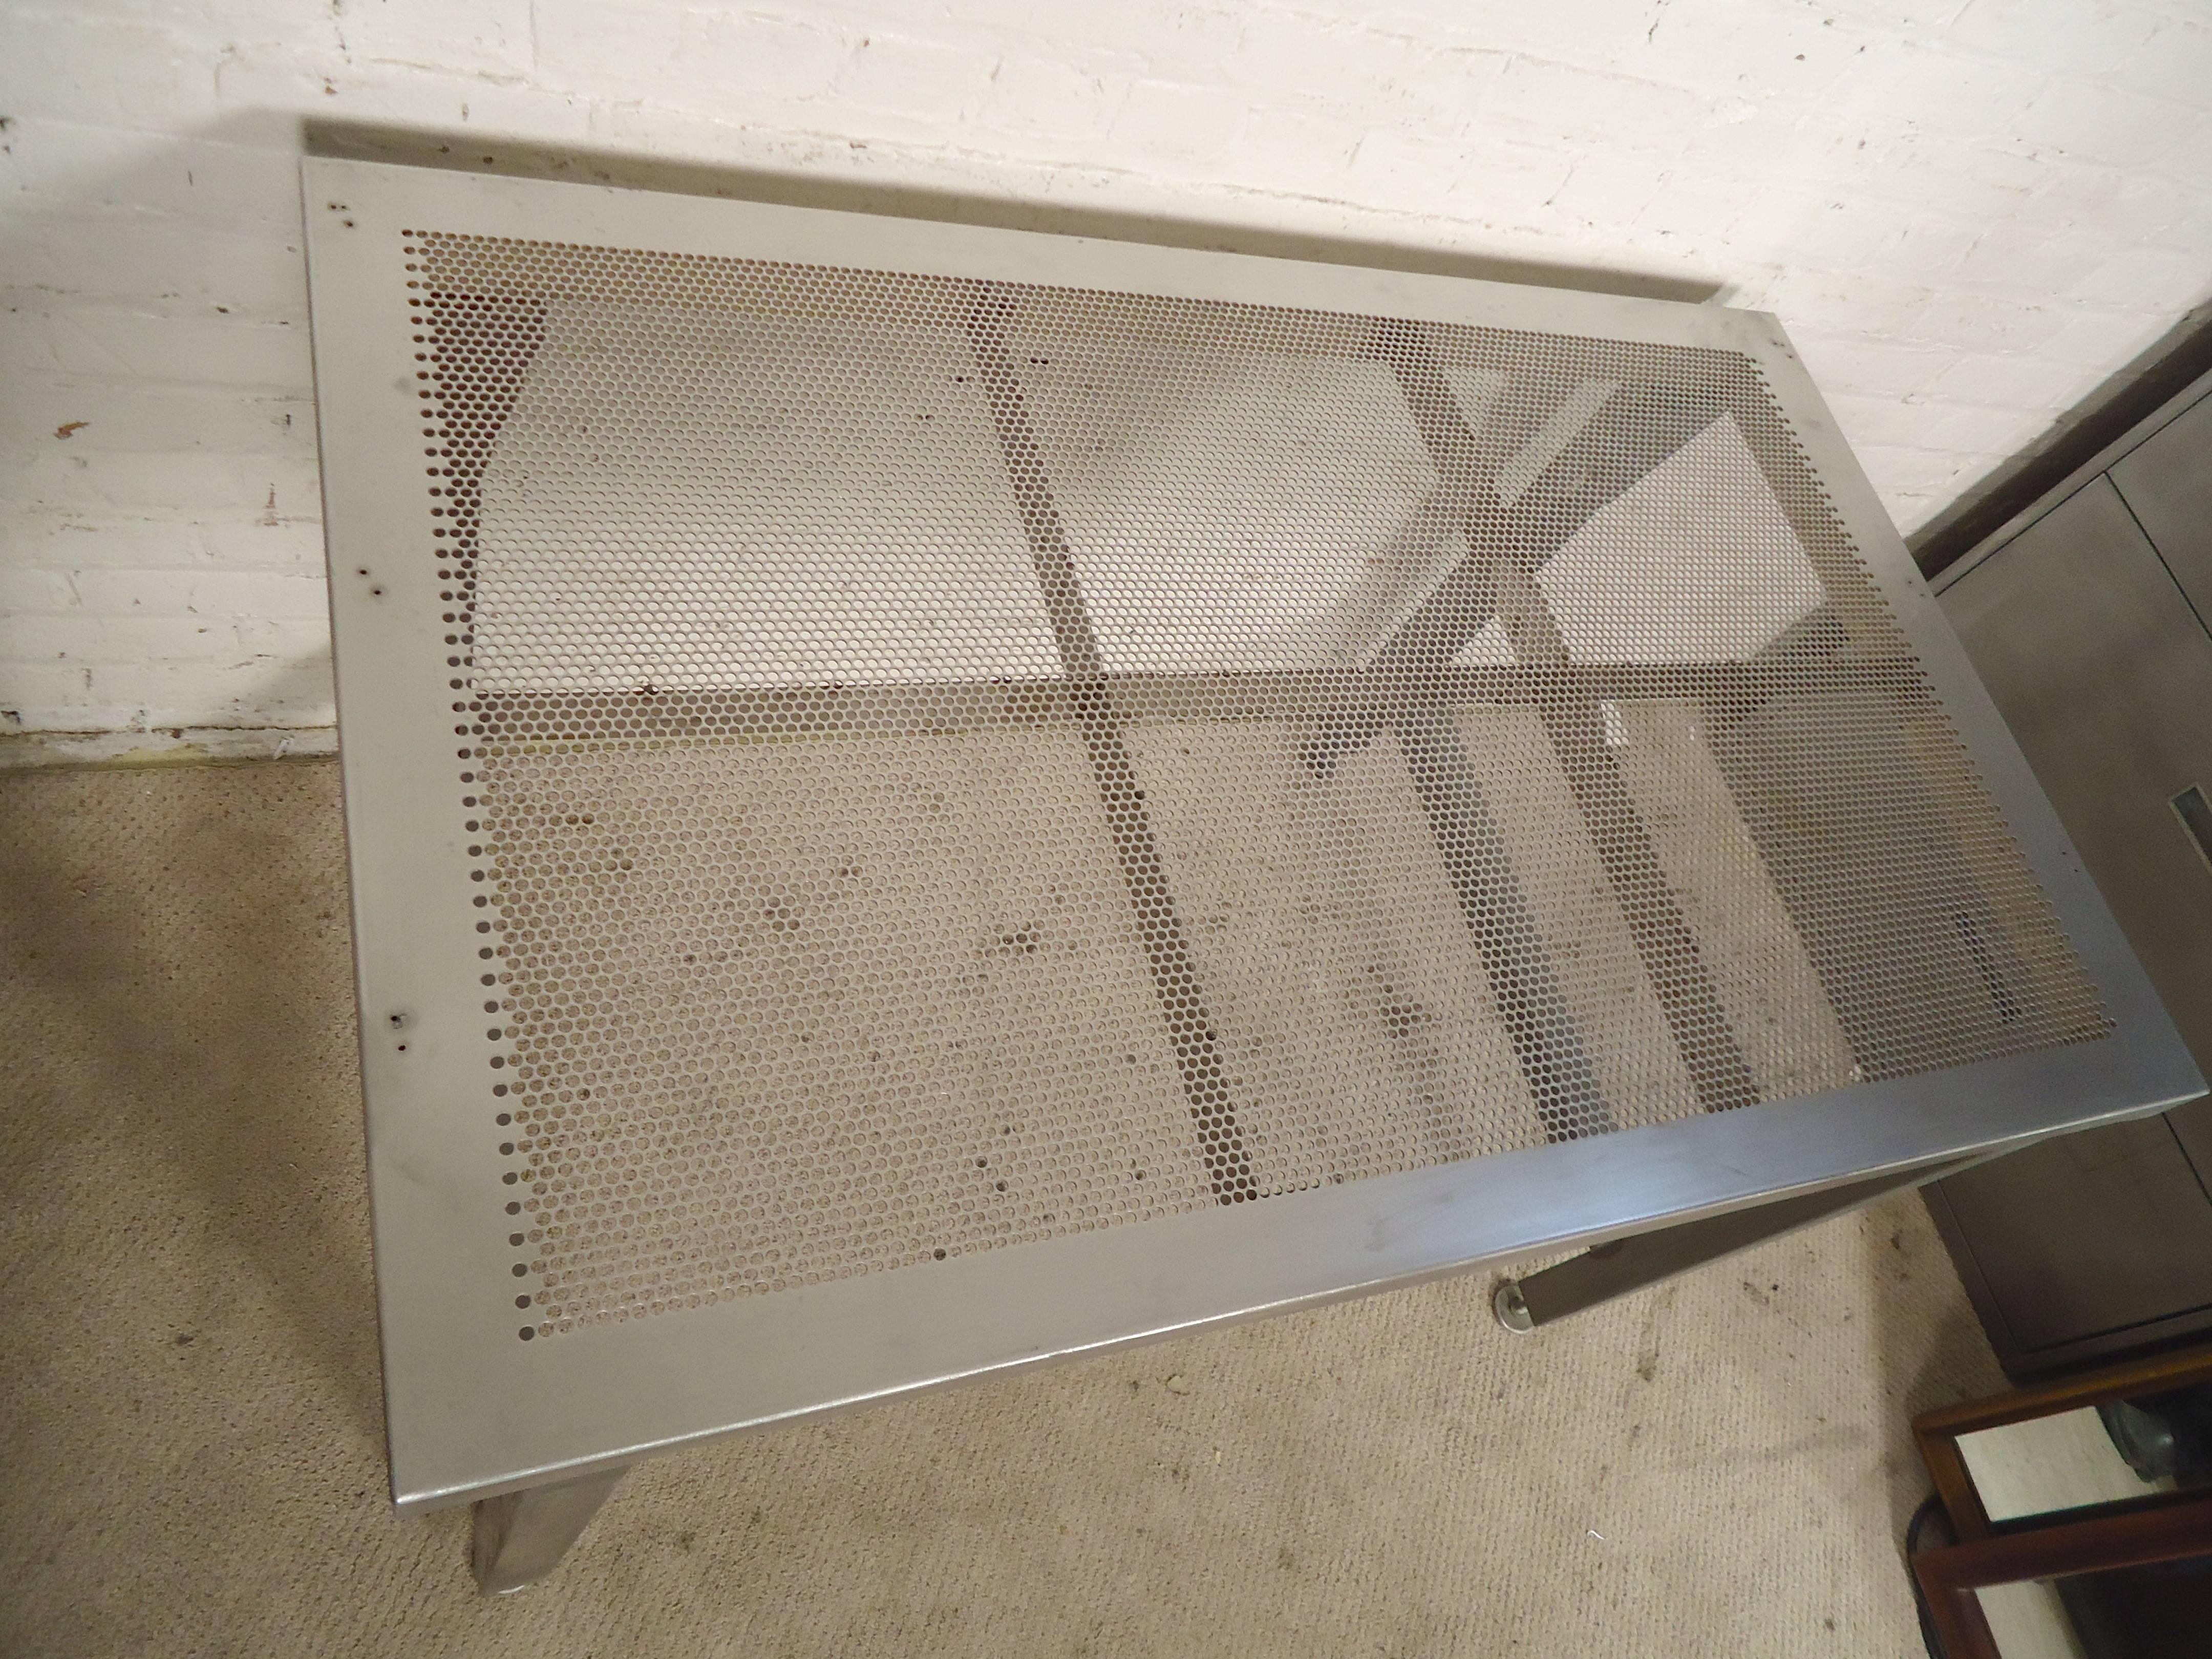 20th Century Factory Work Table with Perforated Top